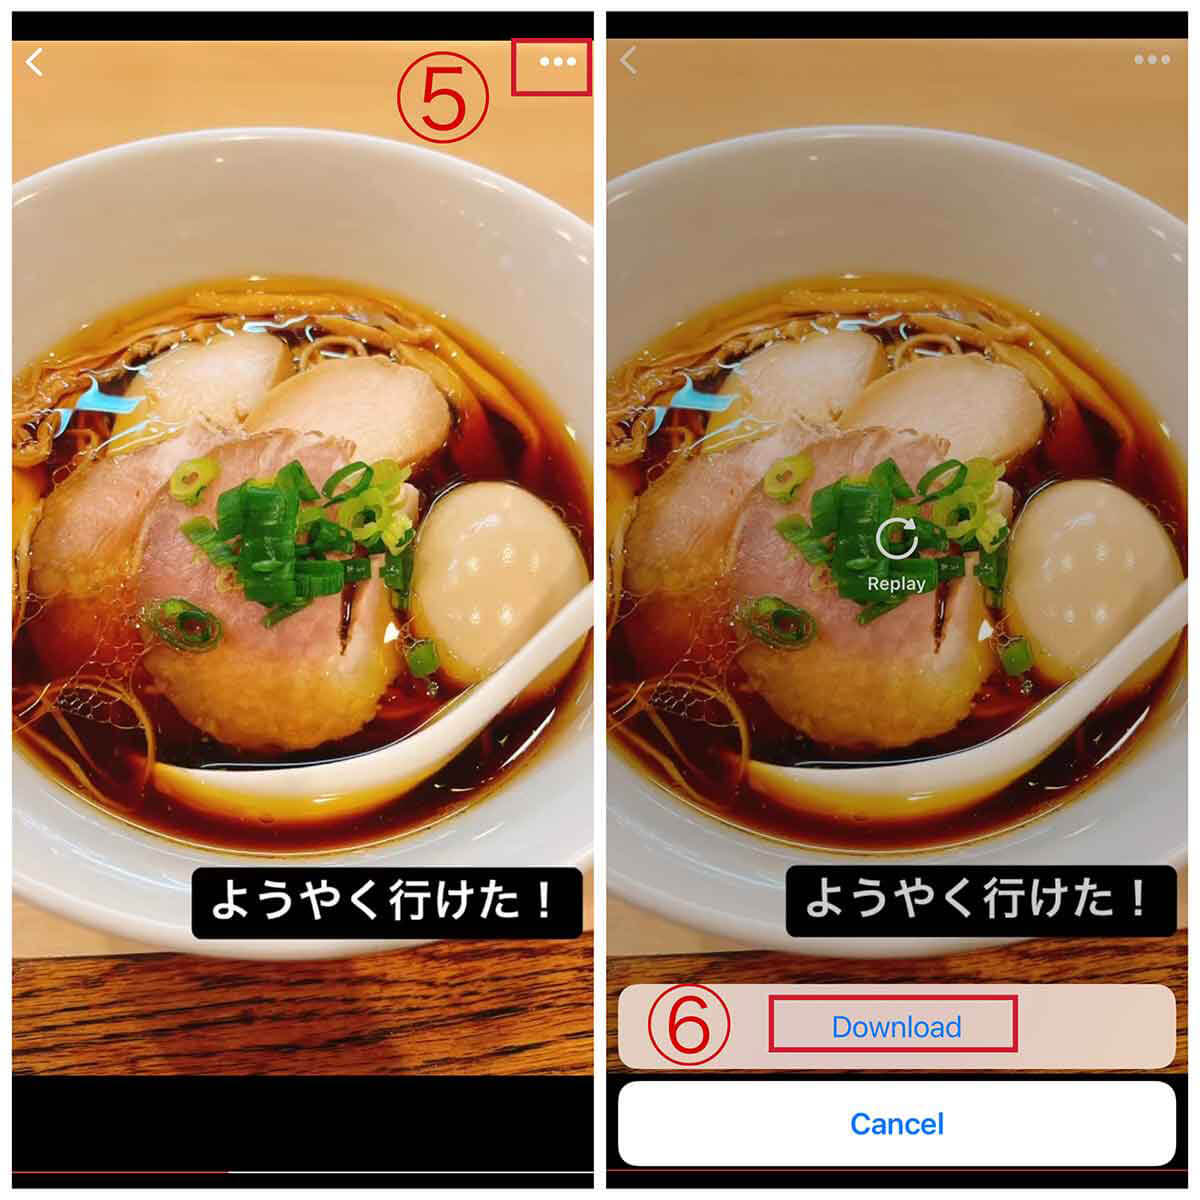 【iPhoneアプリ】iStory for Instagramを利用する3